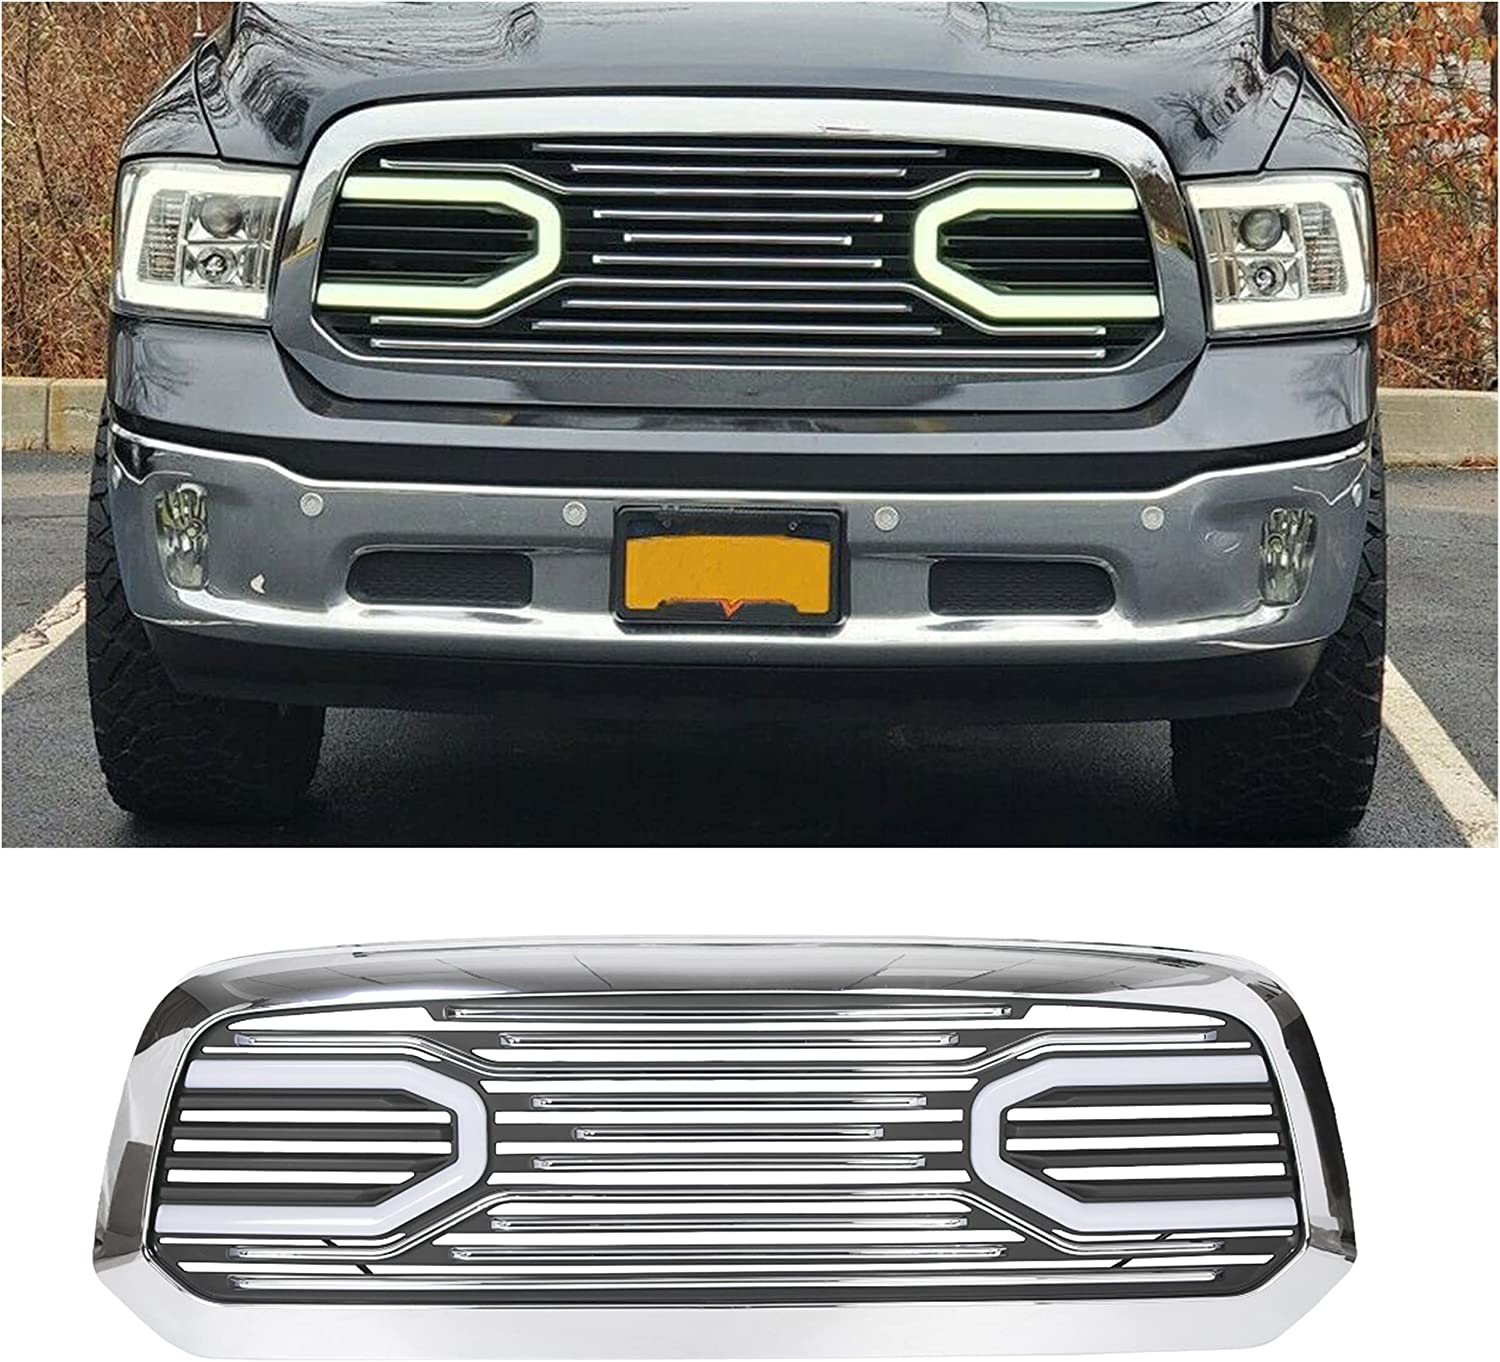 ECOTRIC Front Big Horn Grille Replacement Shell Compatible with 2006 2007  2008 2009 Dodge RAM 1500 2500 3500(W/Light, Black) 並行輸入品